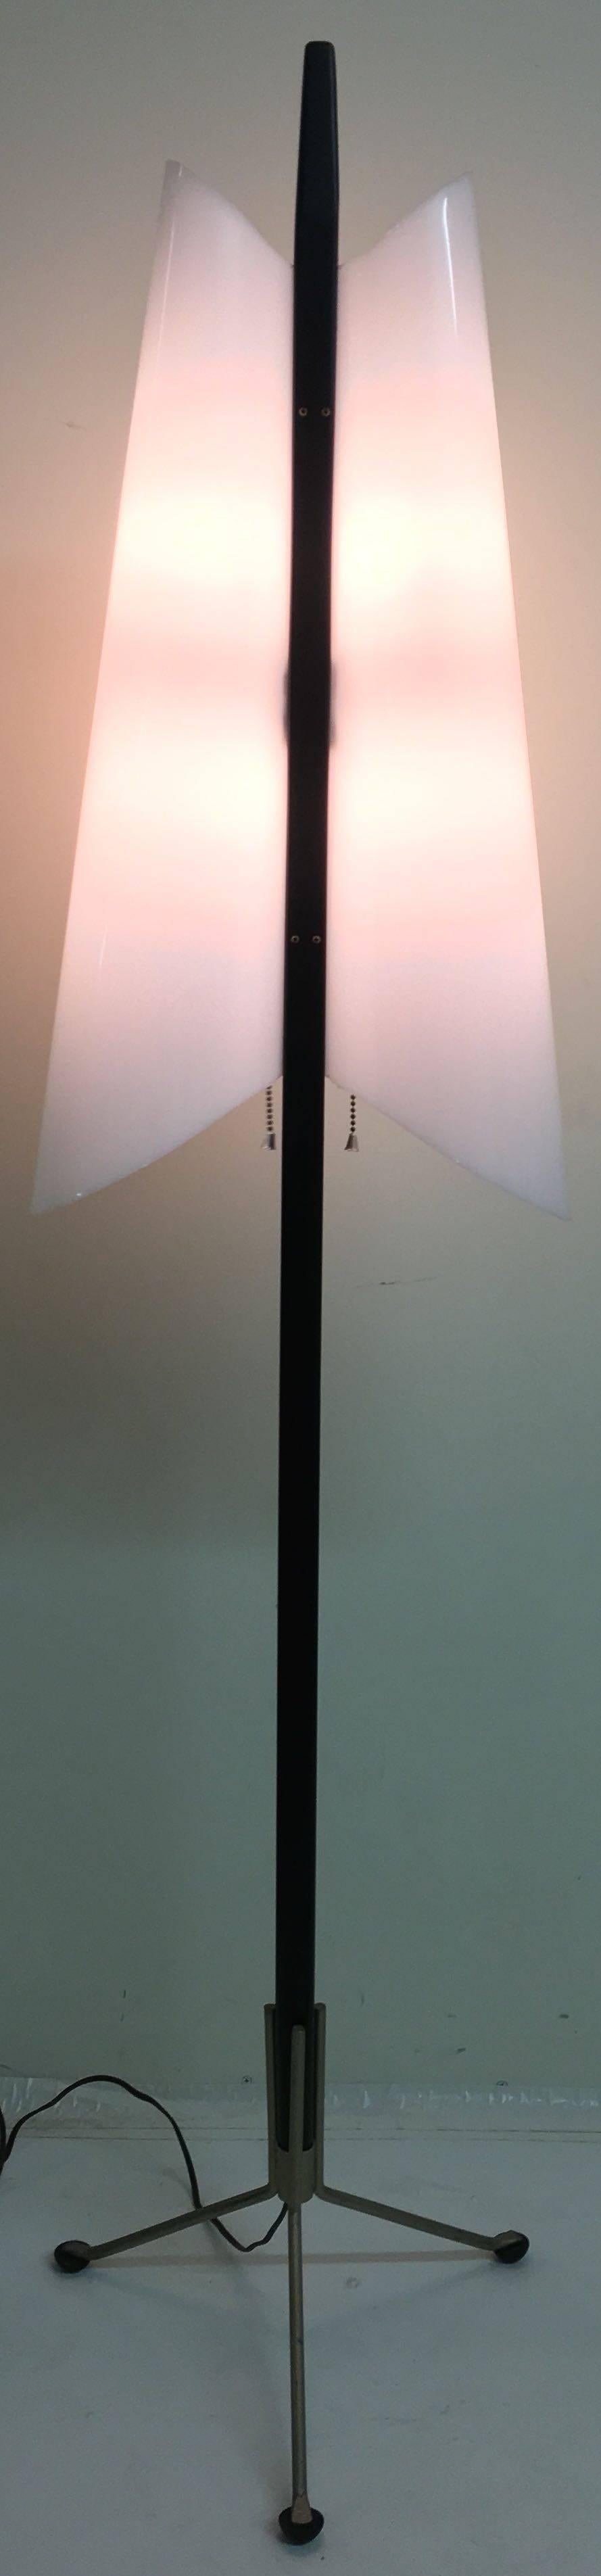 A really unusual Danish floor lamp by Hans Agne jakobsson, circa late 1950s. It’s in wonderful condition with perfectly duplicated new lampshades. The main shaft is ebonized hardwood and the three-legged metal base has cool little black pod feet.